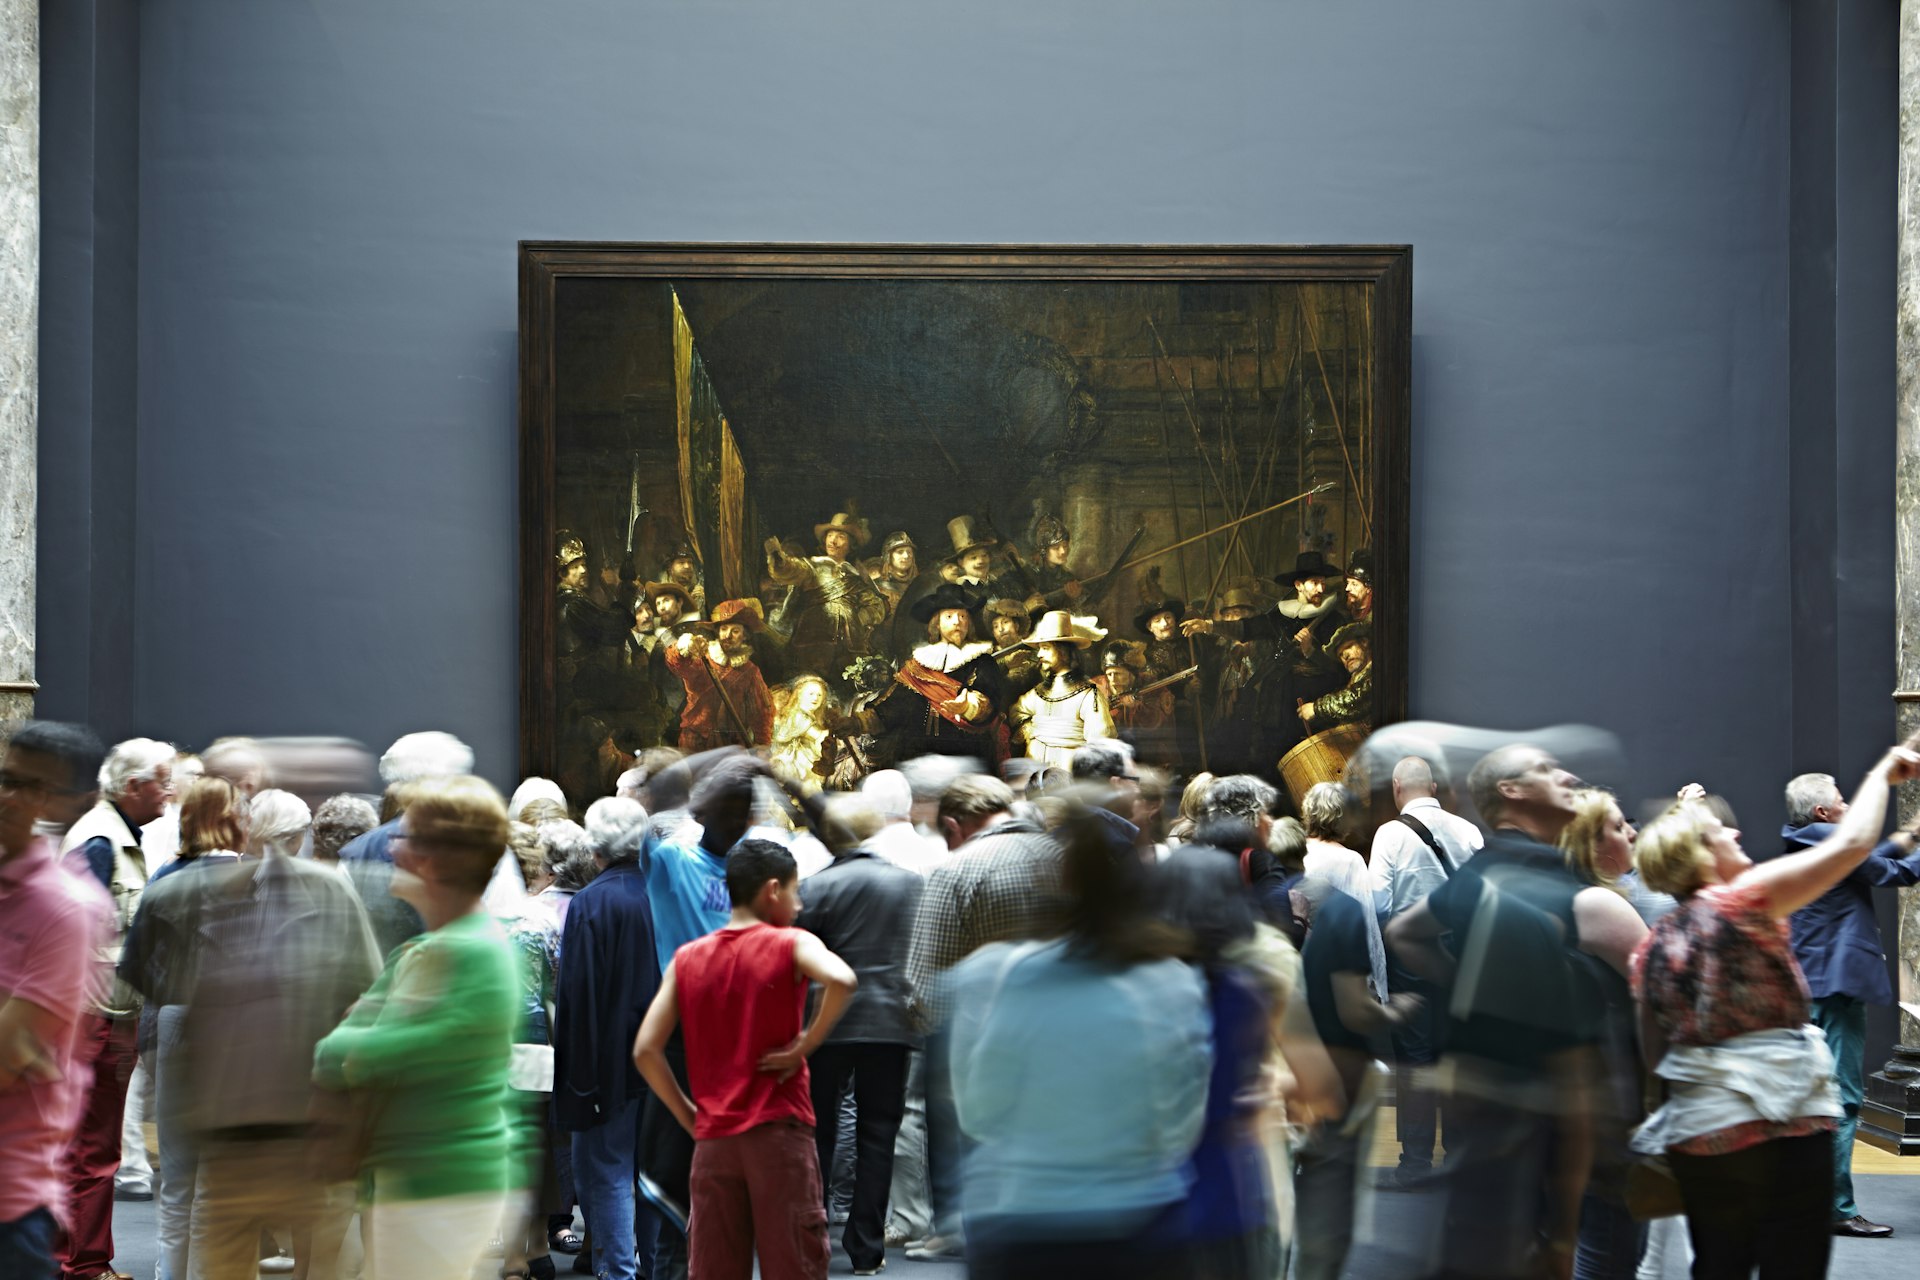 Rembrandt’s 'The Night Watch' at the Rijksmuseum.